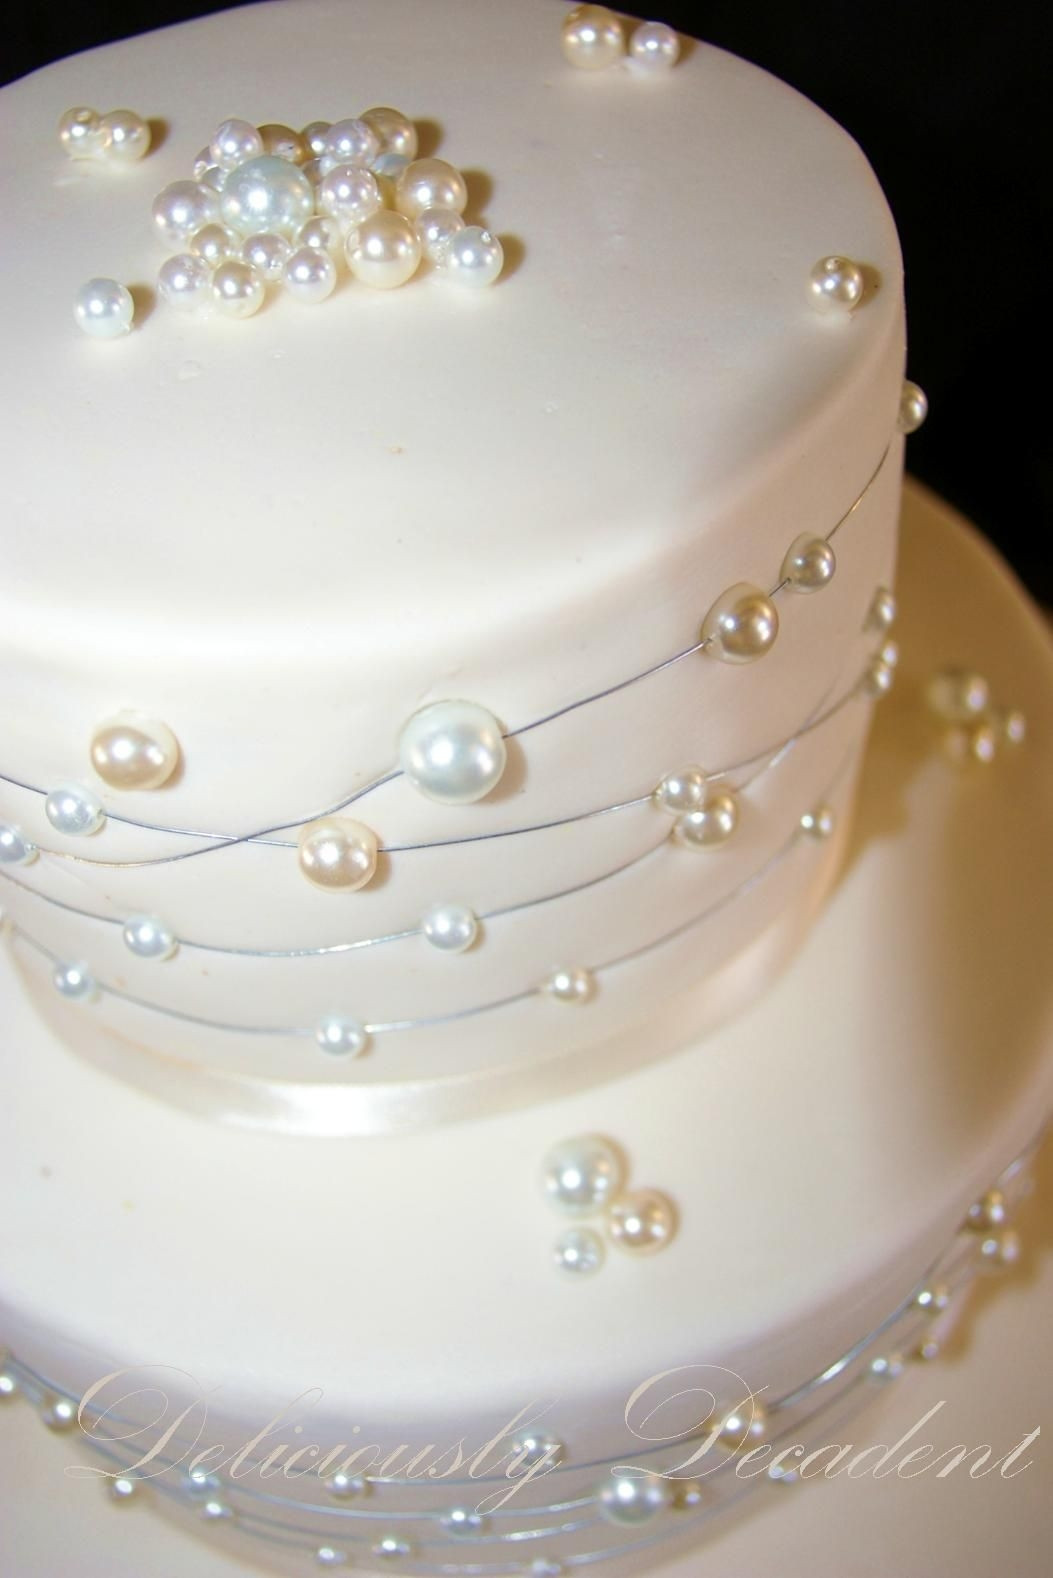 Wedding Cakes With Pearls
 The Baby Pearl CakeCentral